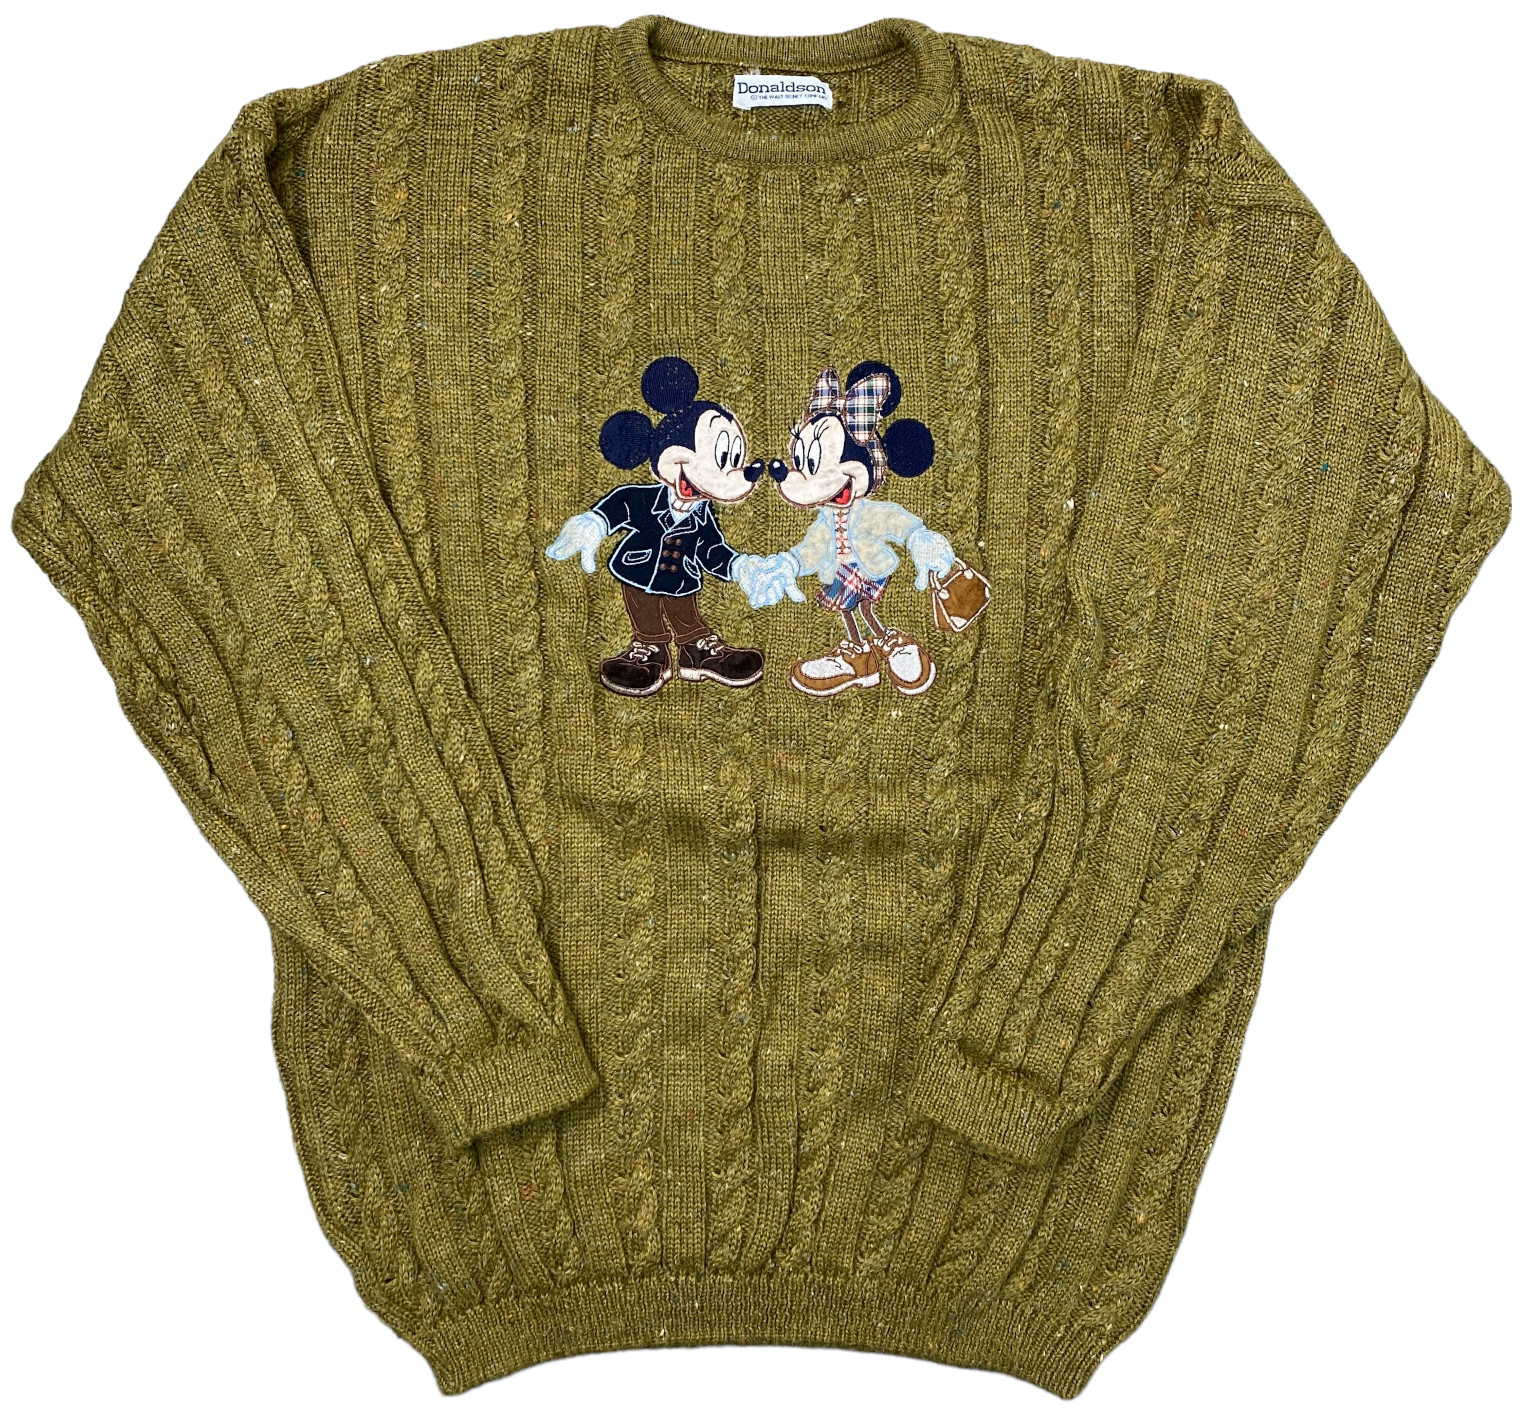 Green knit jumper with an embroidered Mickey and Minnie